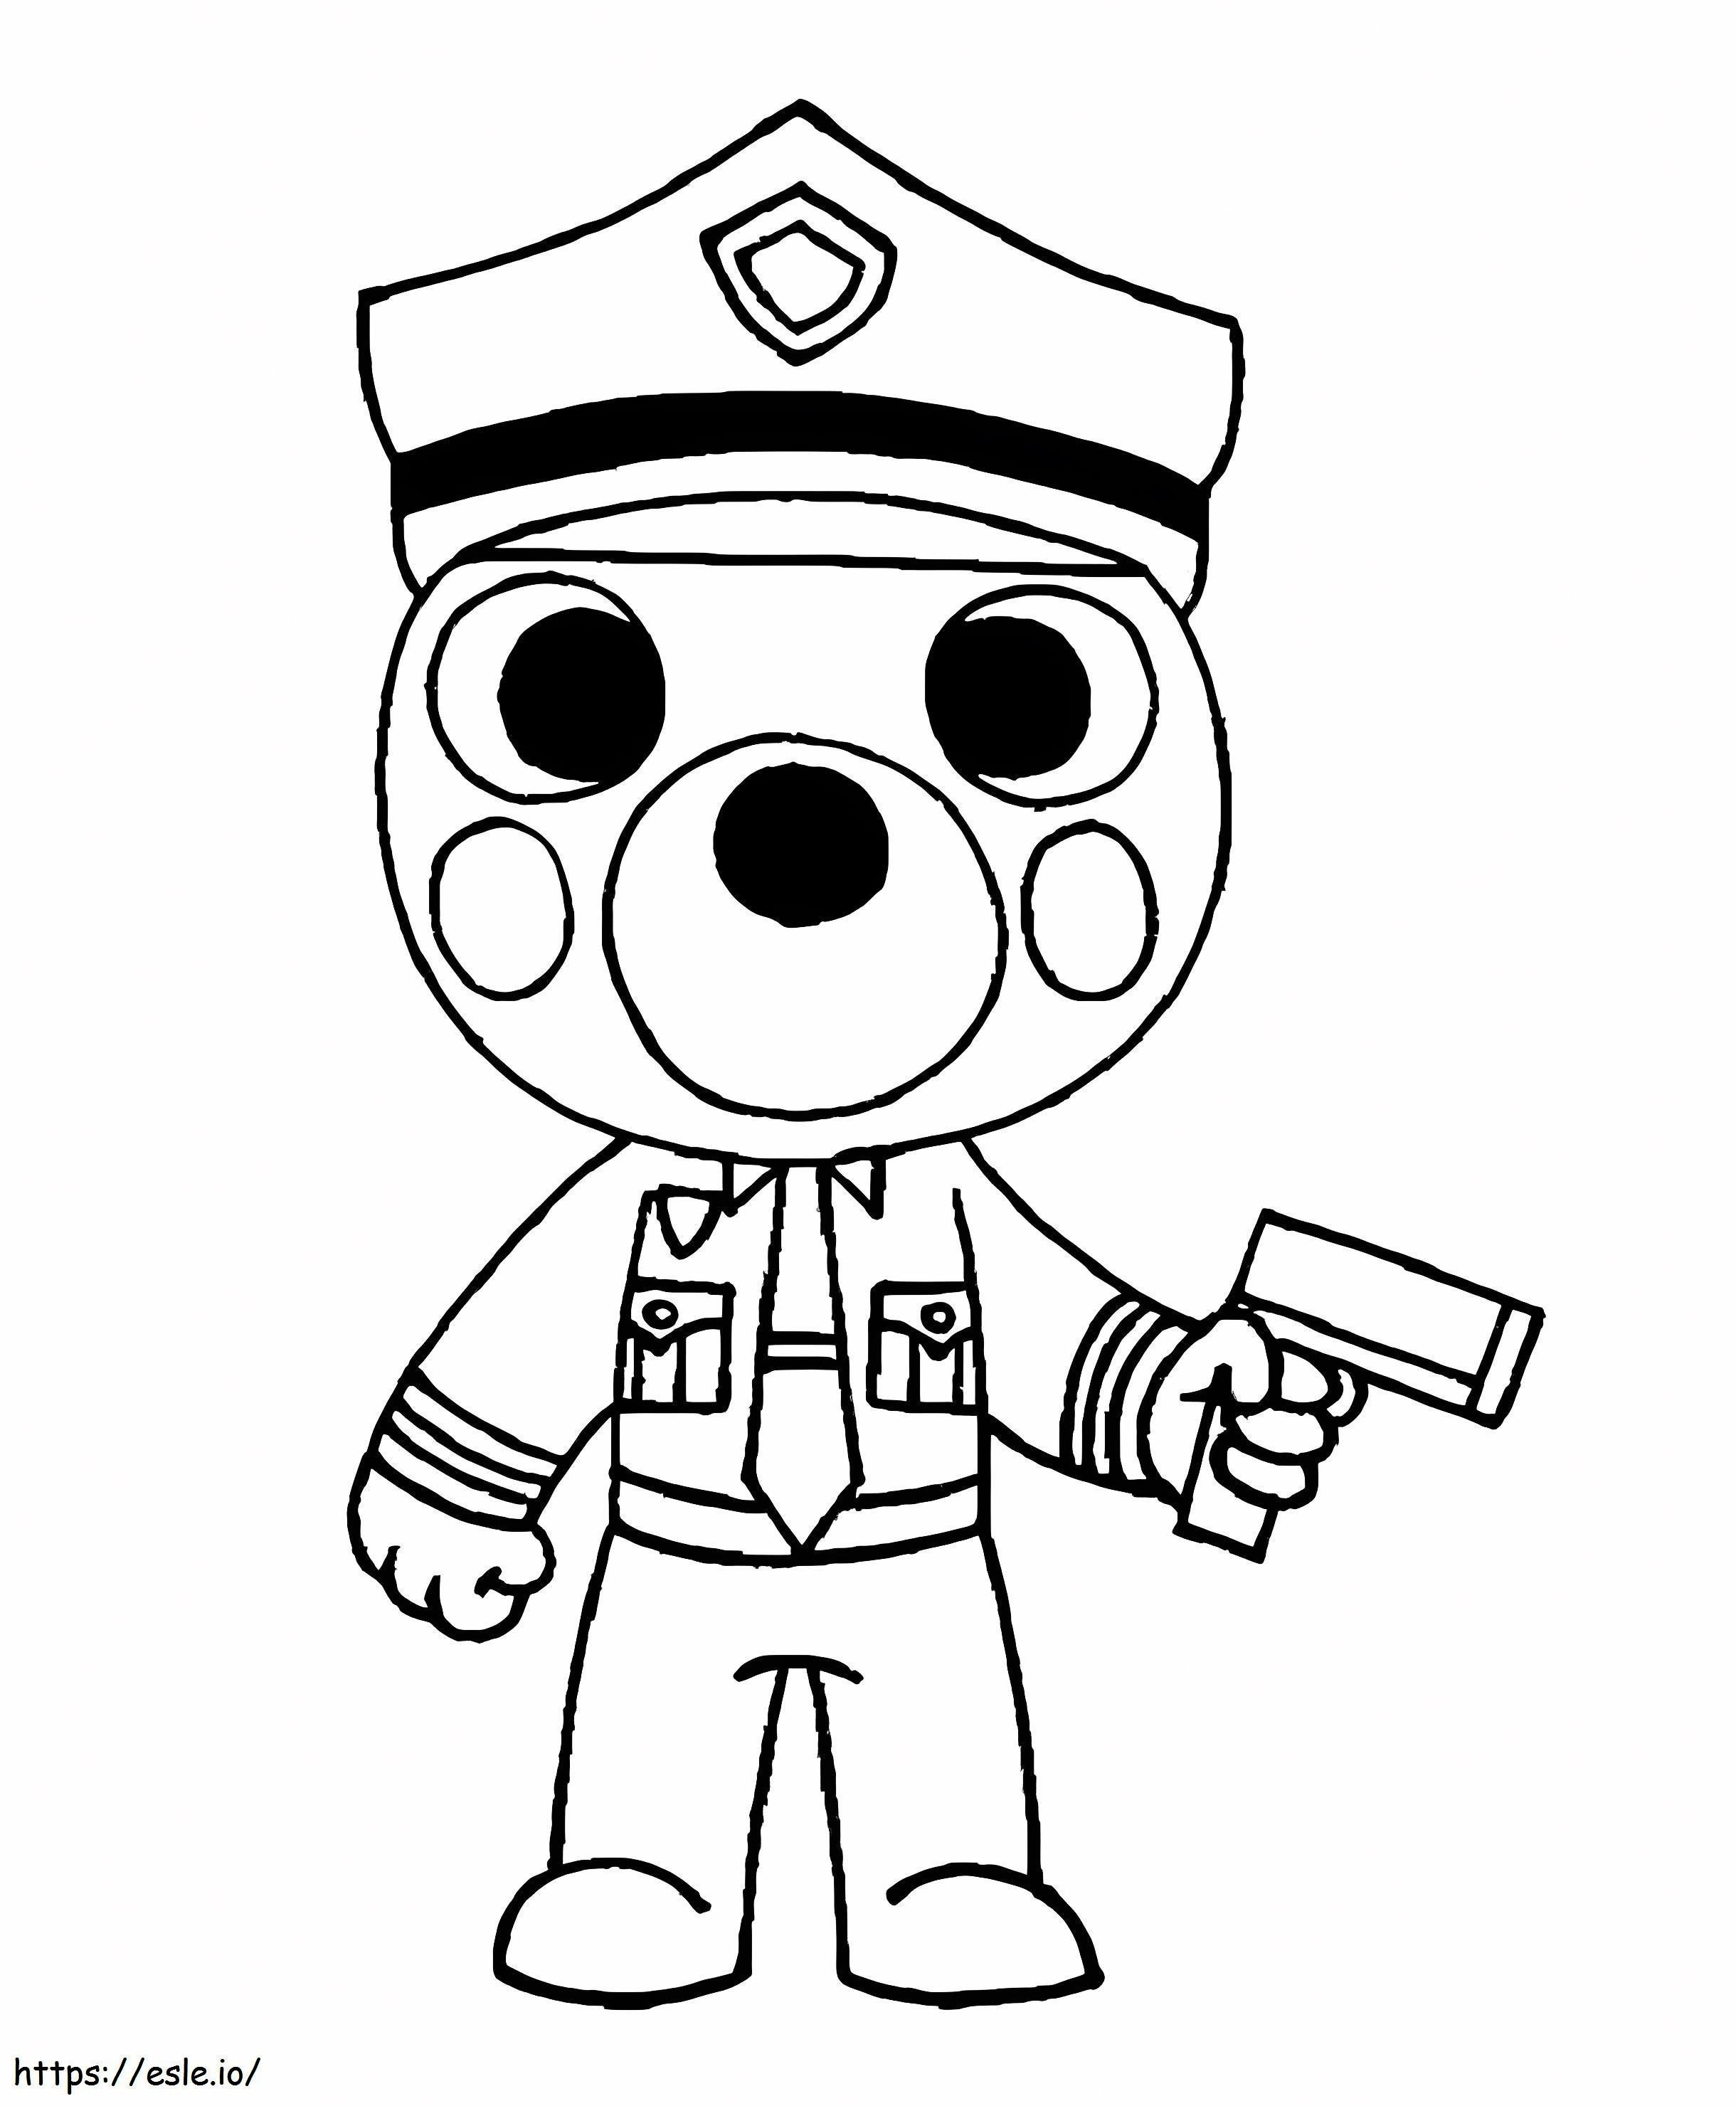 Officer Doggy Piggy Roblox coloring page